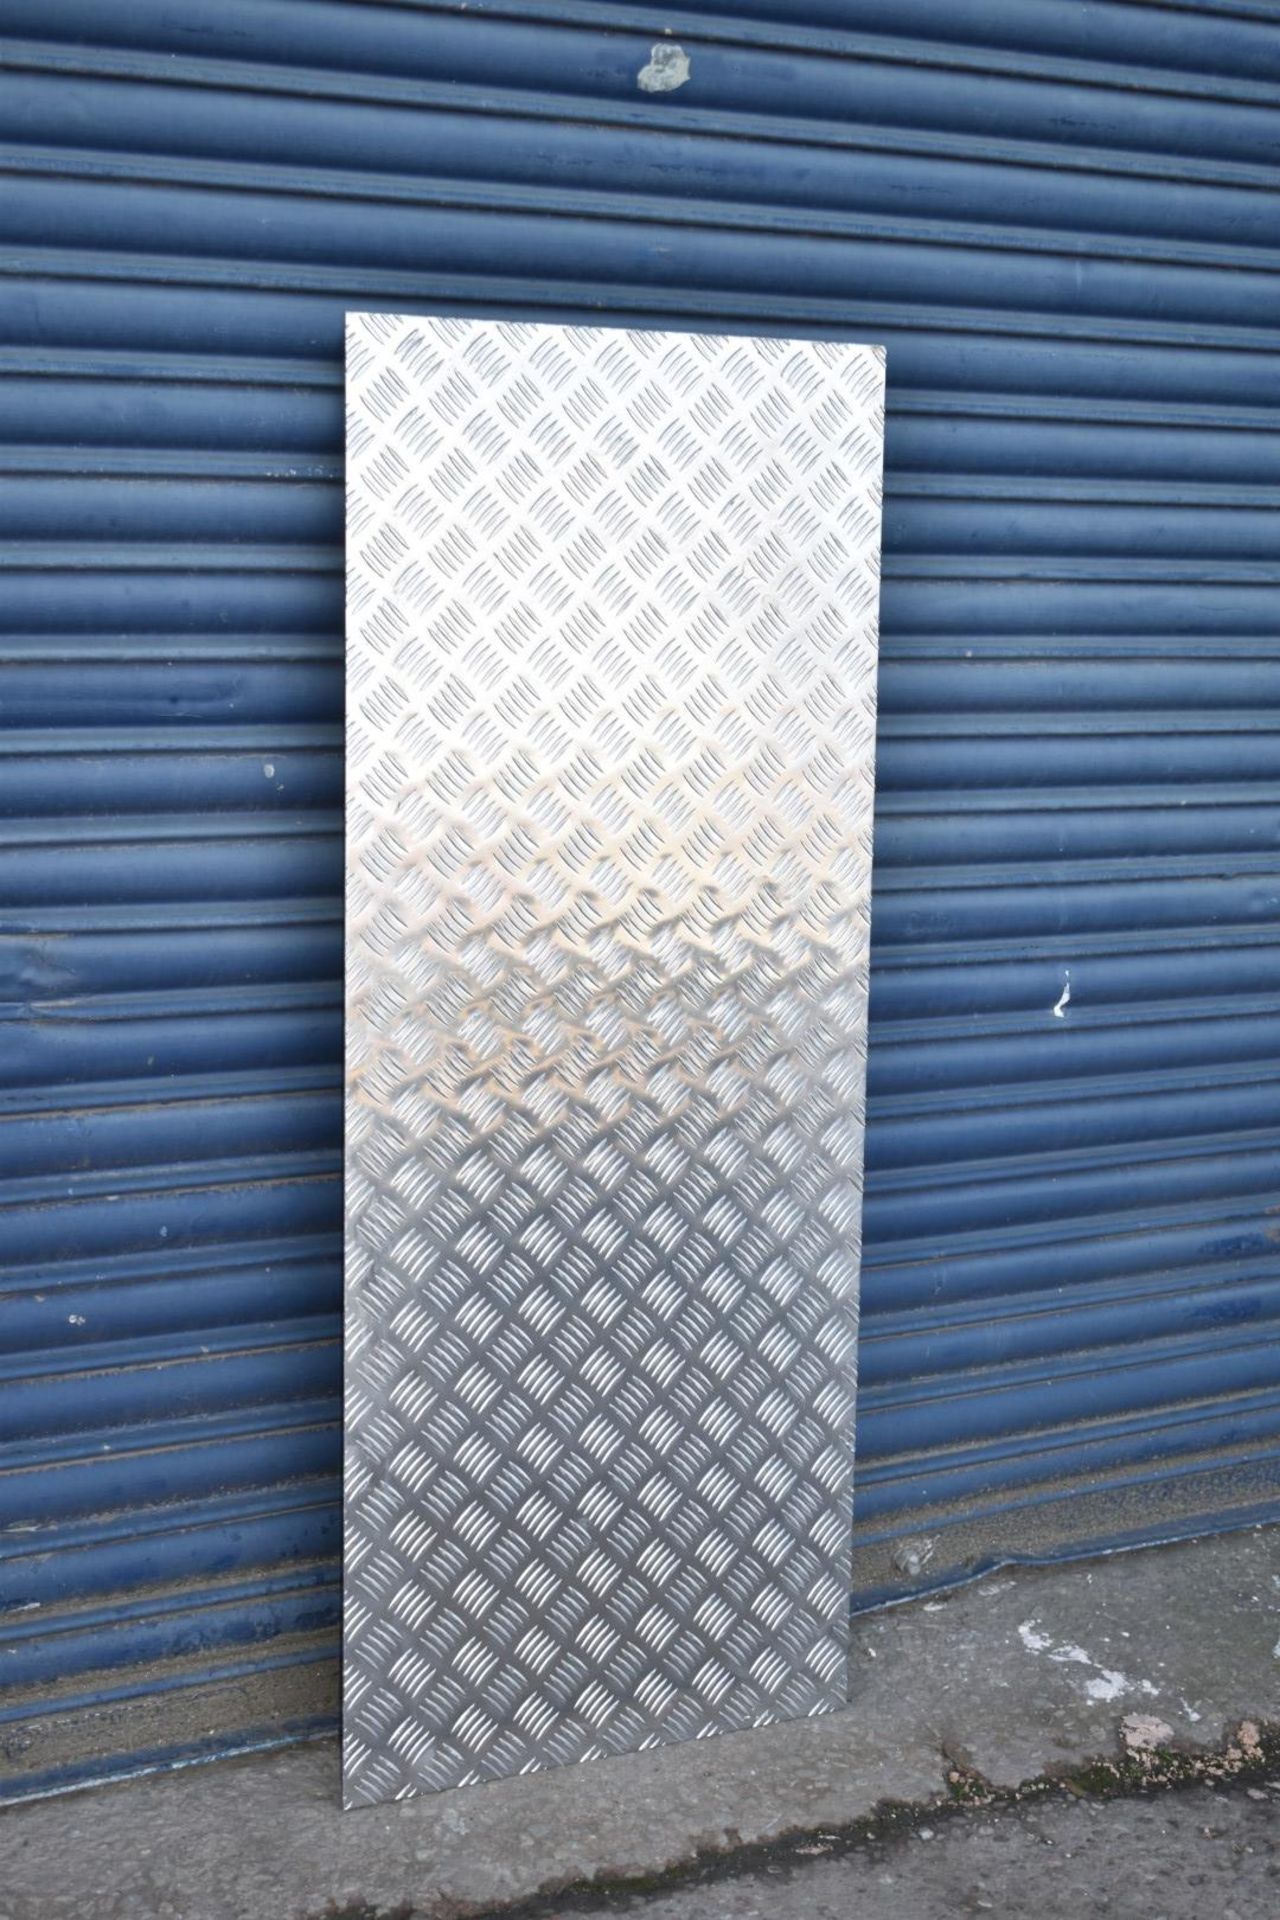 1 x Aluminium Tread Checker Plate - Size 125 x 50.5 x 0.3 cms - None Slip Floor Plate Suitable For - Image 5 of 11